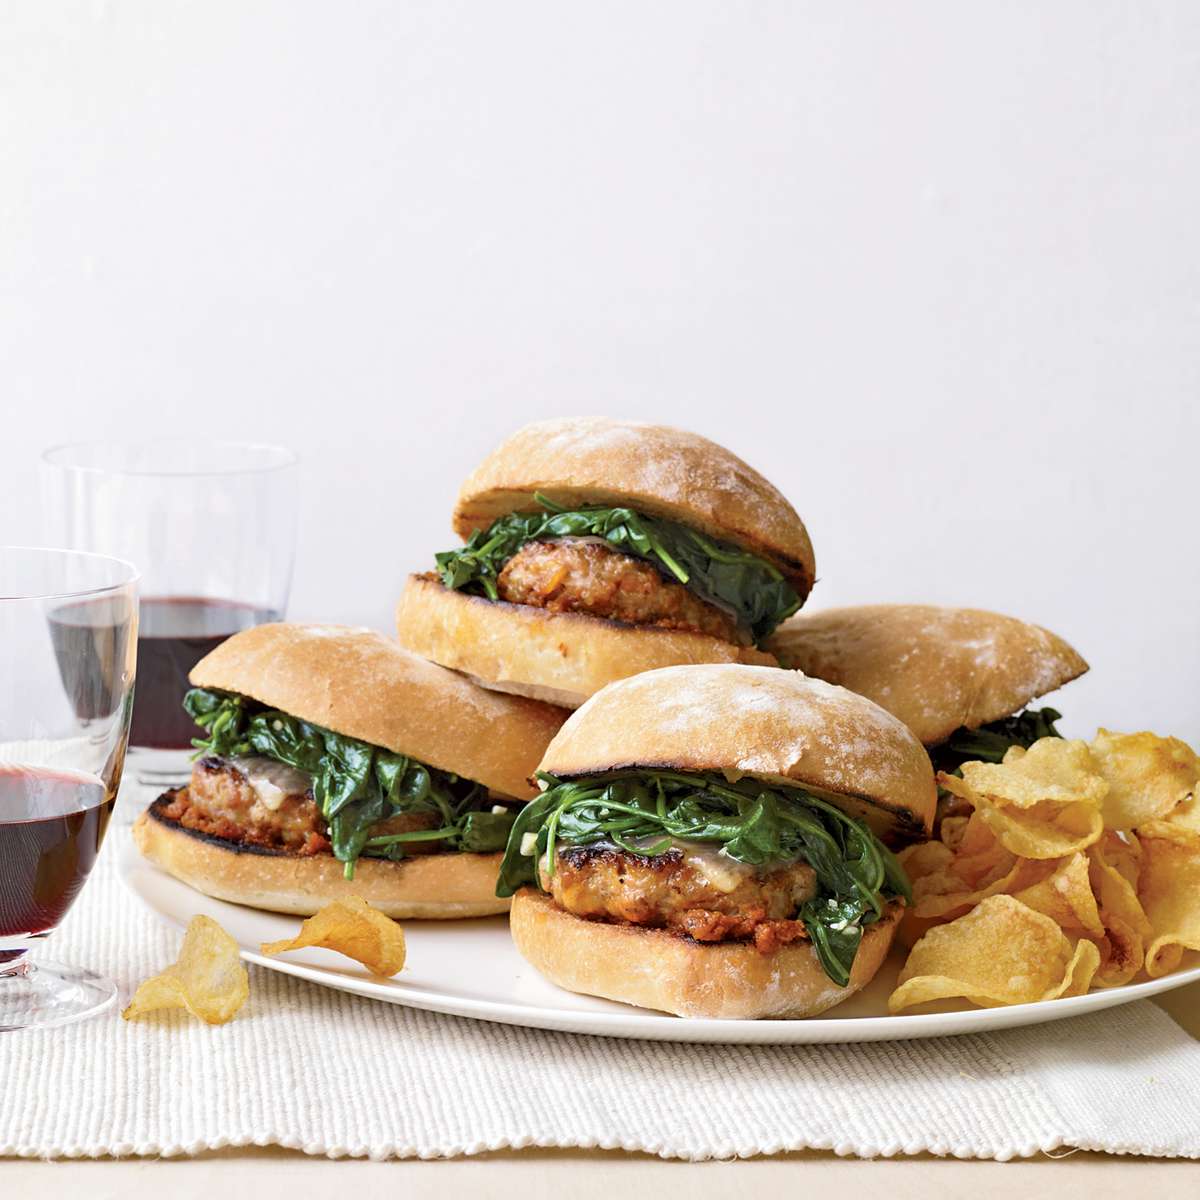 Italian-Sausage Burgers with Garlicky Spinach